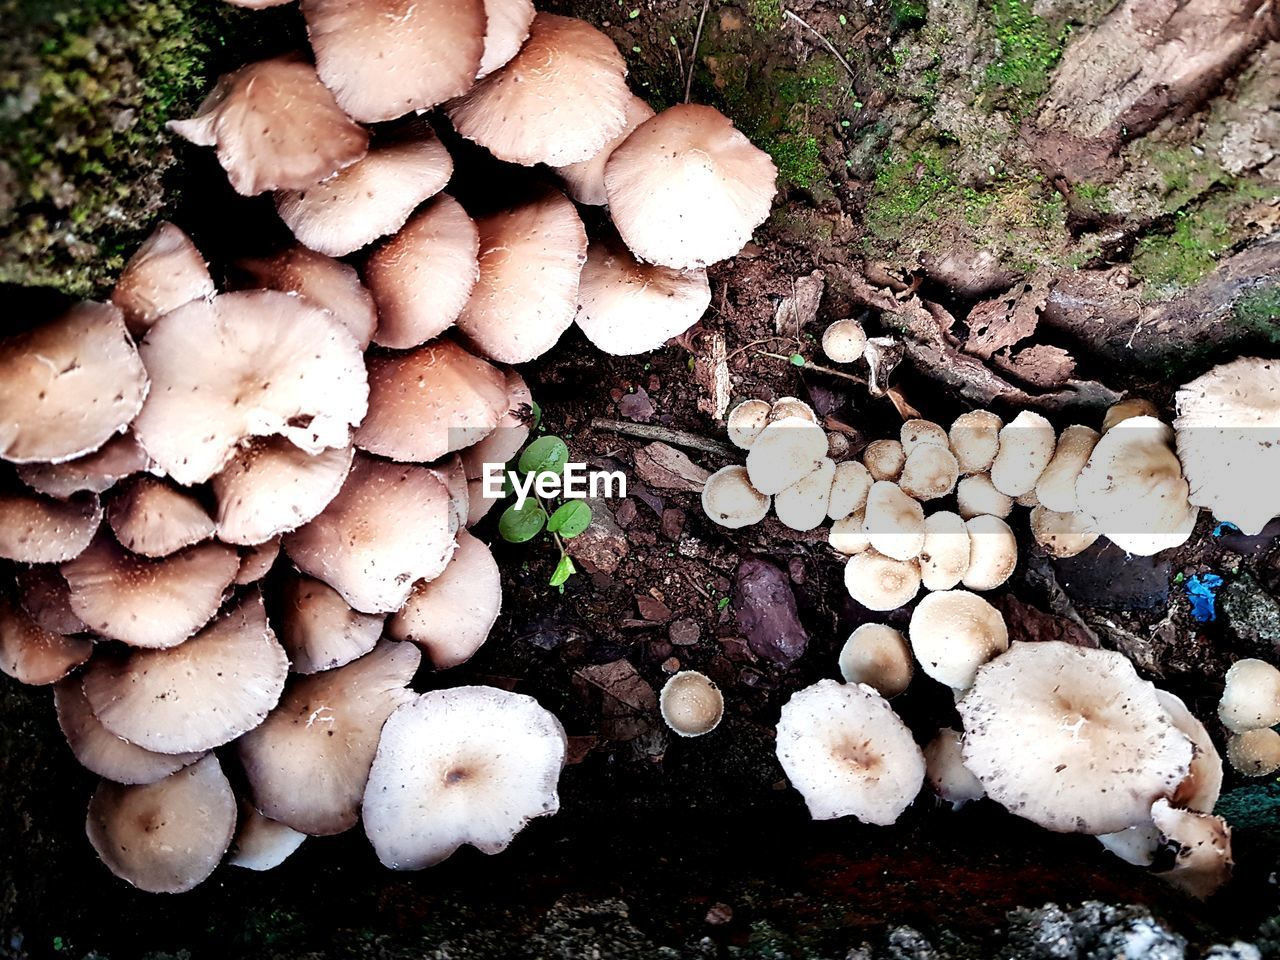 HIGH ANGLE VIEW OF MUSHROOMS GROWING ON LAND